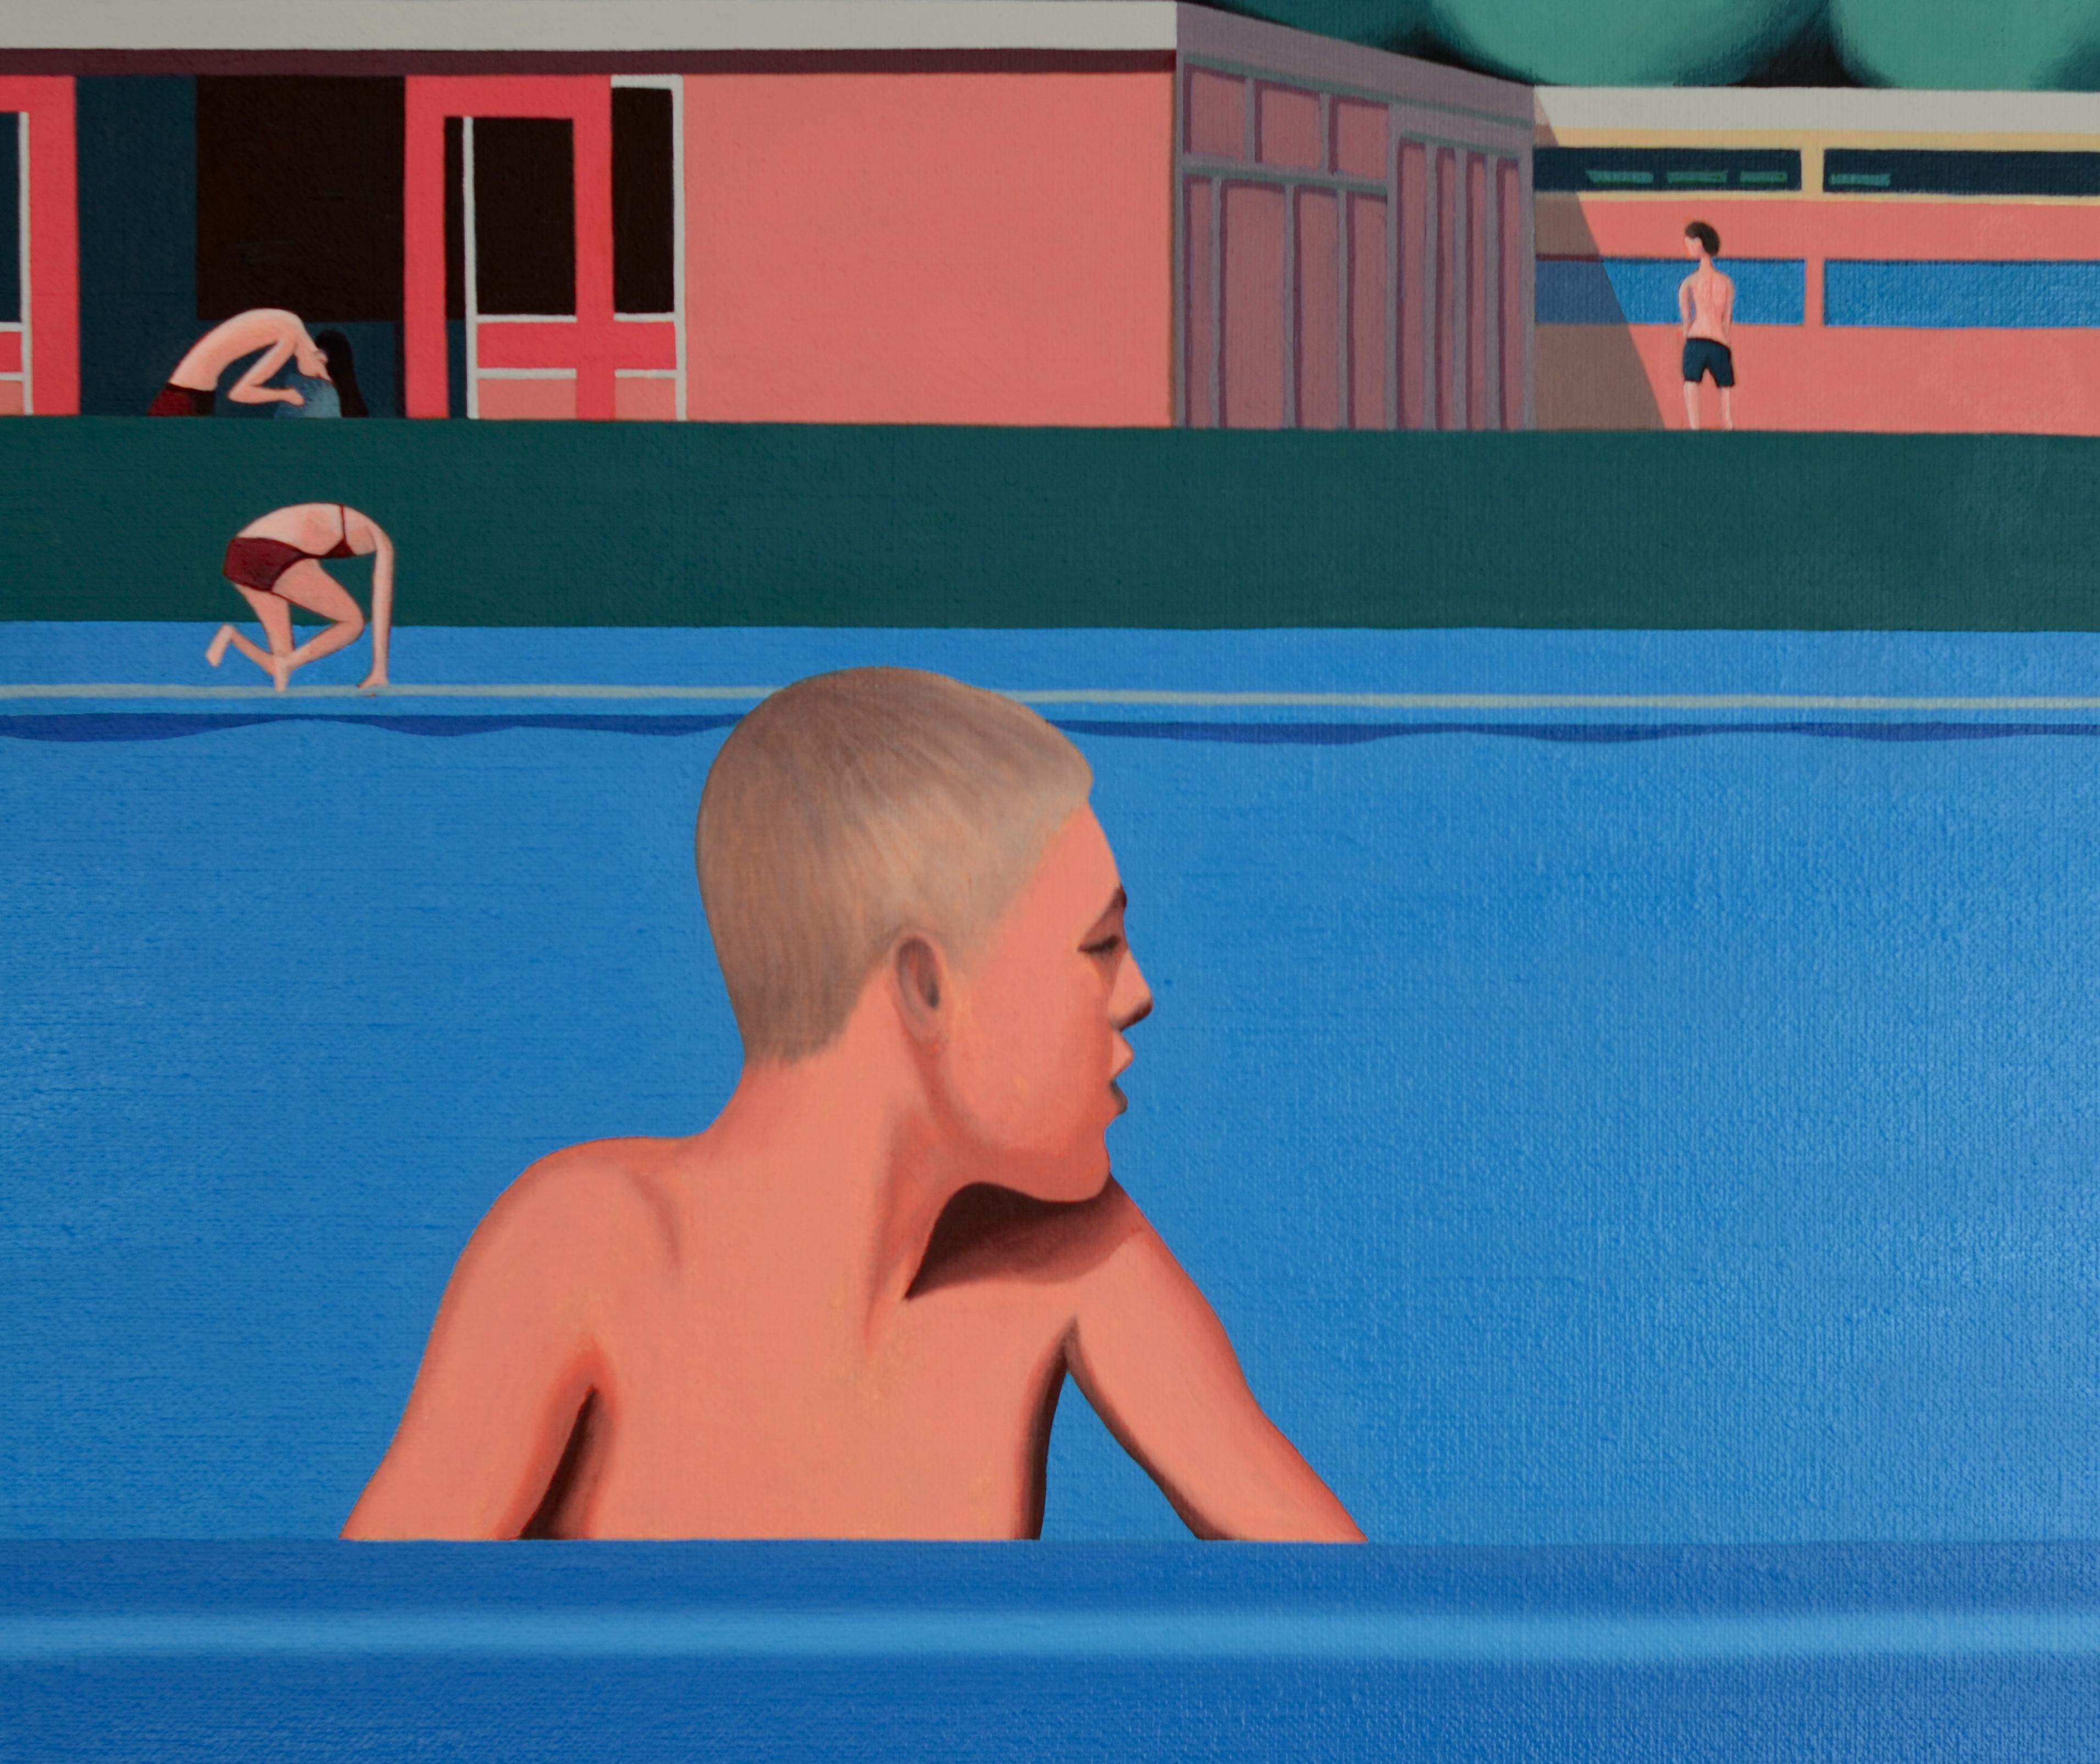 Swimming pool - figurative landscape painting - Painting by Jeroen Allart